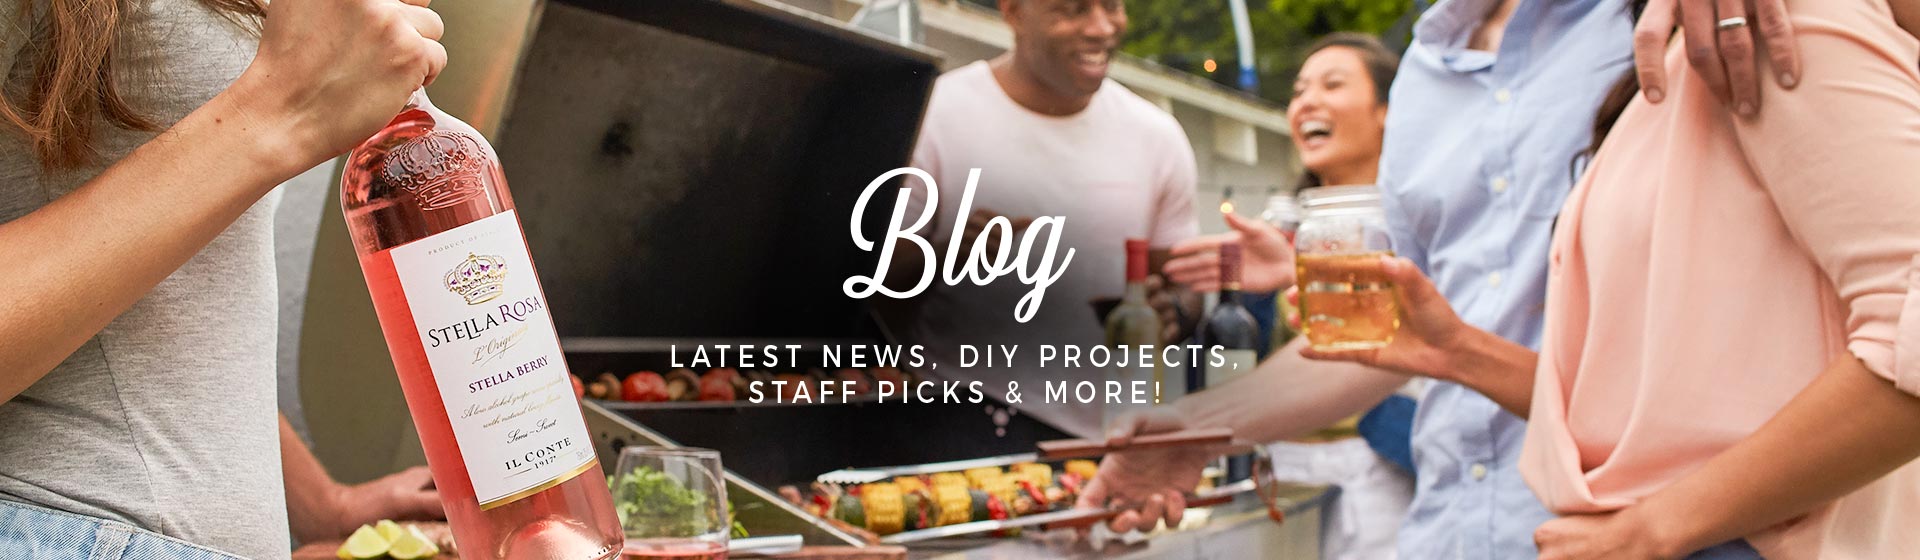 Blog - Latest new, DIY projects, staff picks & more